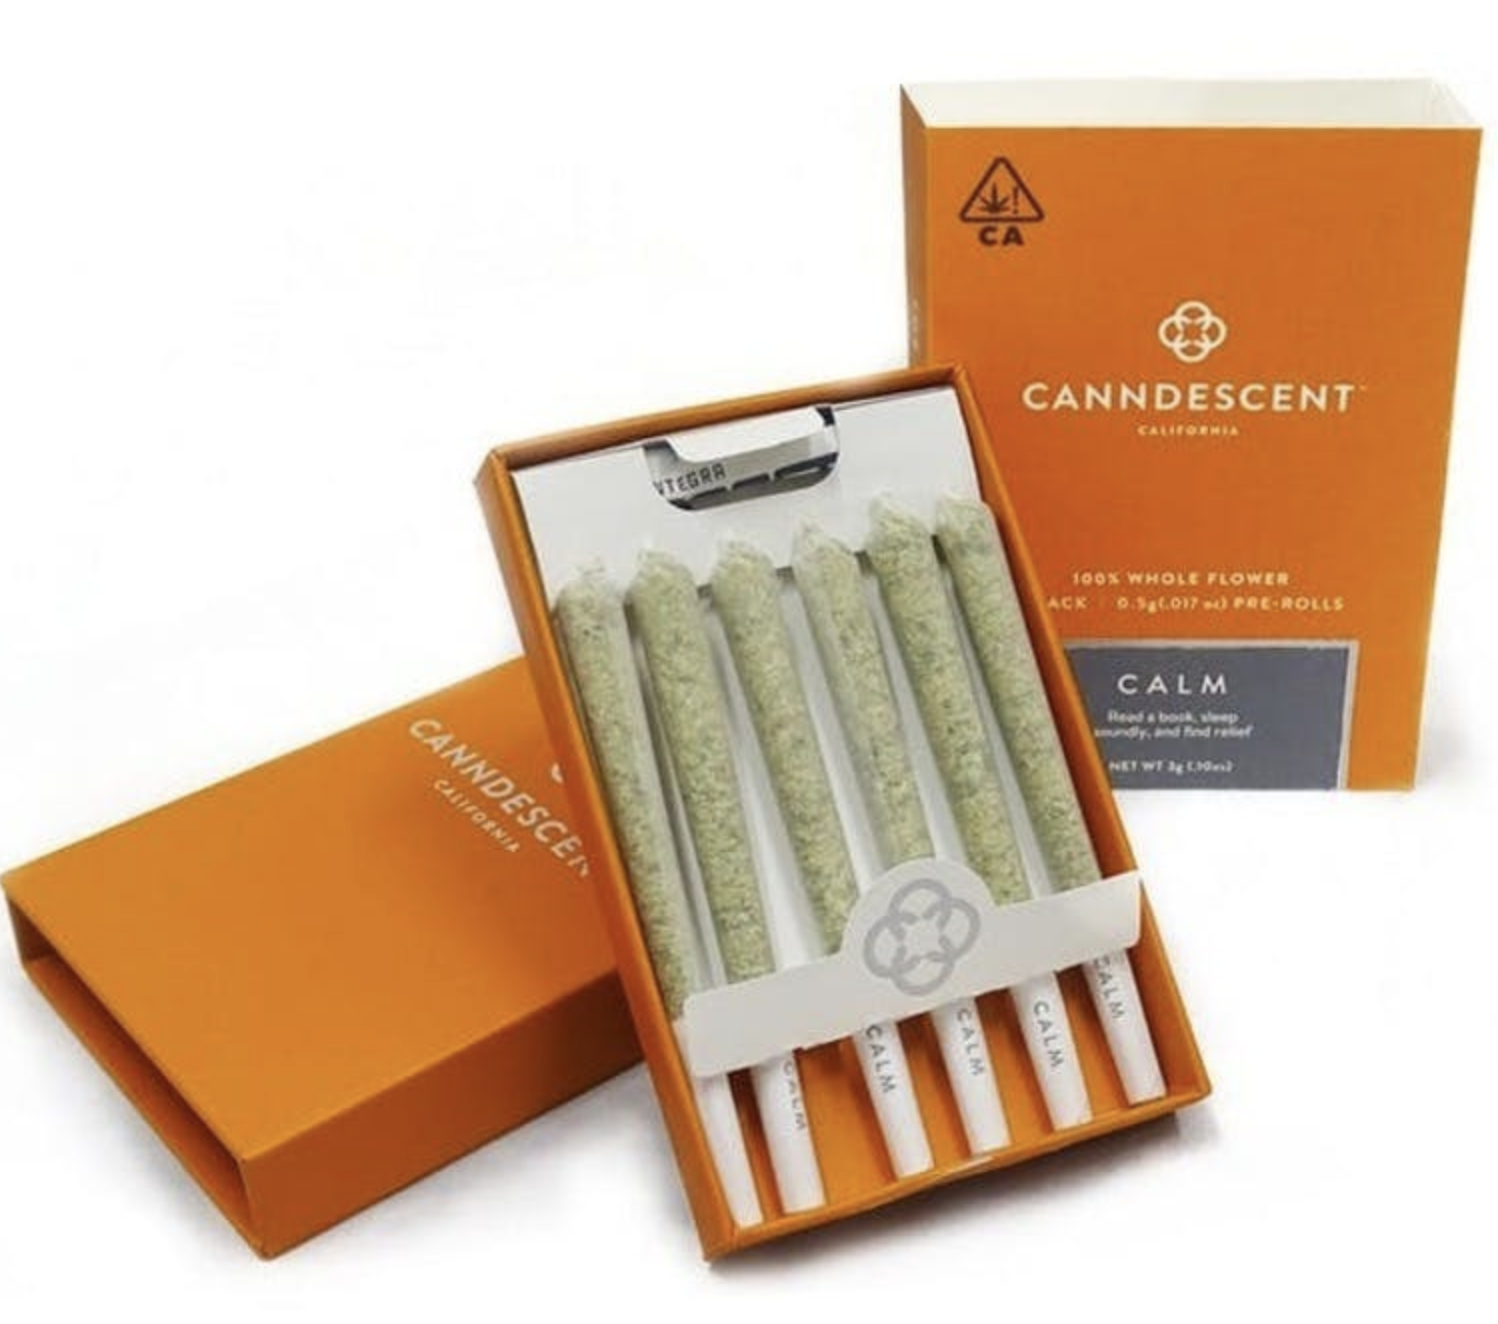 An example of cannabis pre-rolls by Canndescent